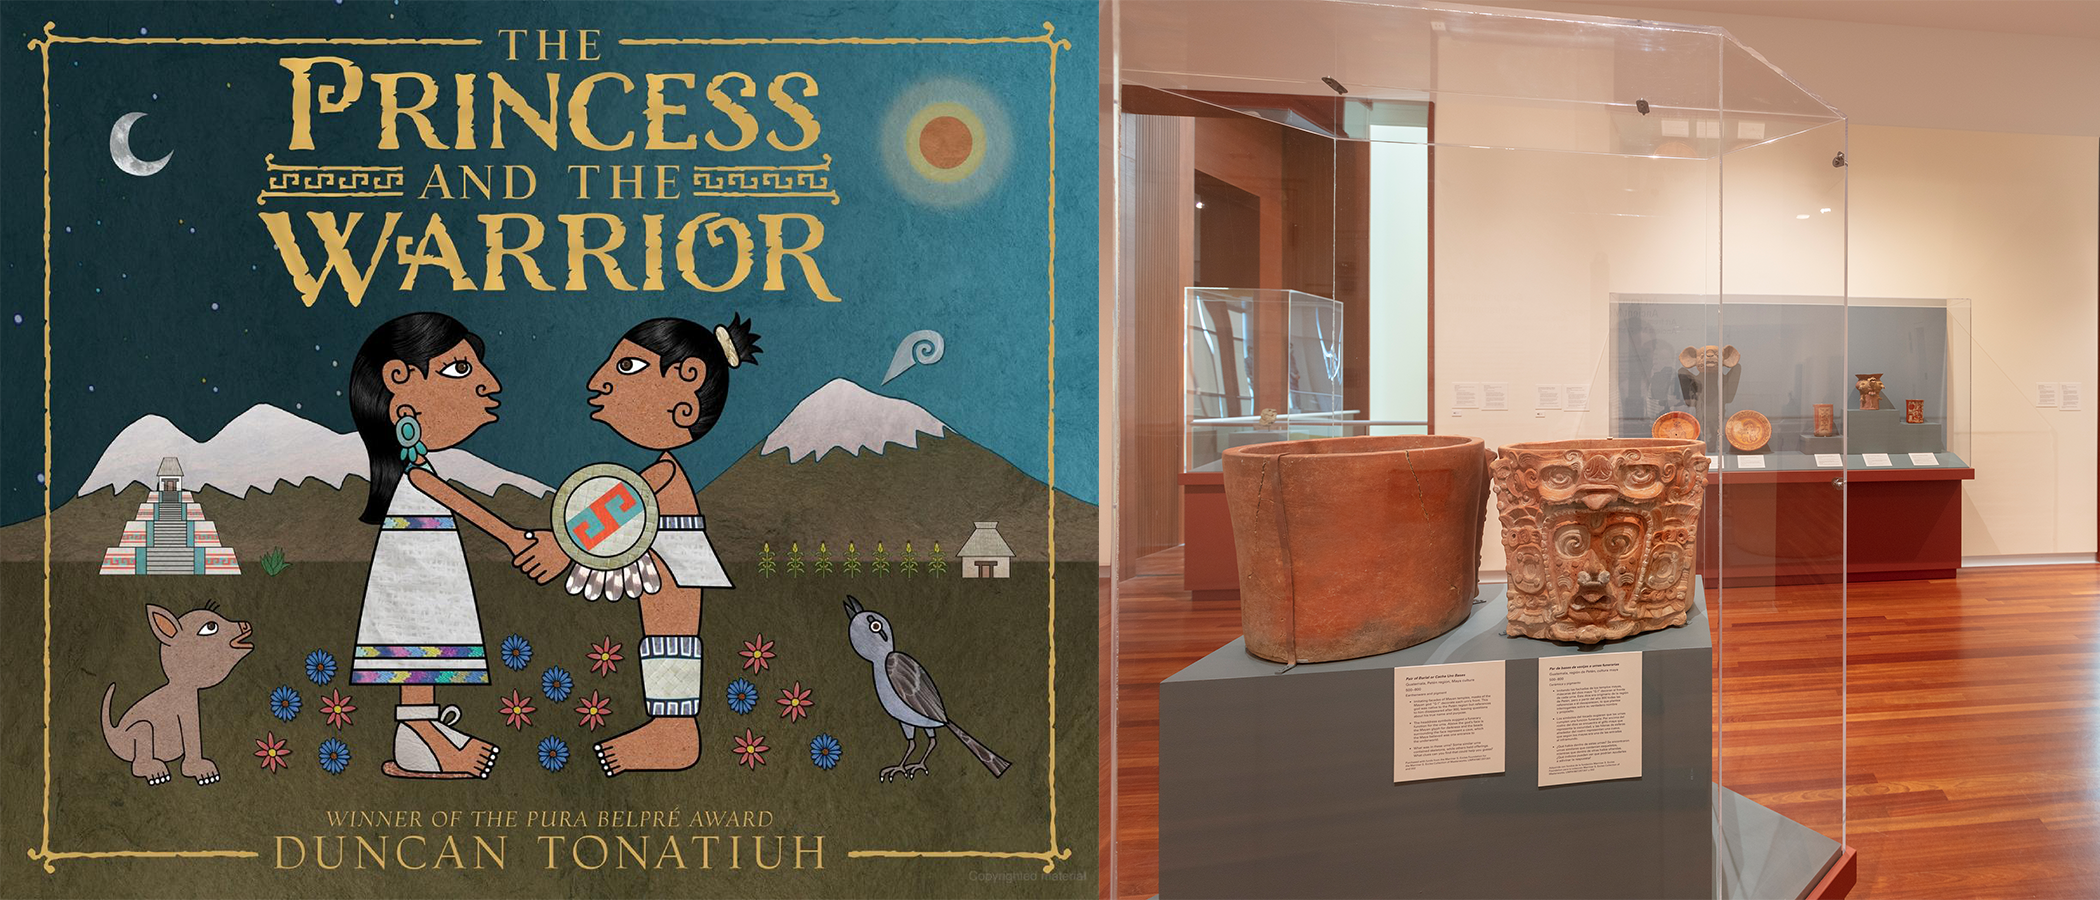 The cover of "The Princess and the Warrior" and a photo of the Mesoamerican gallery in the UMFA.